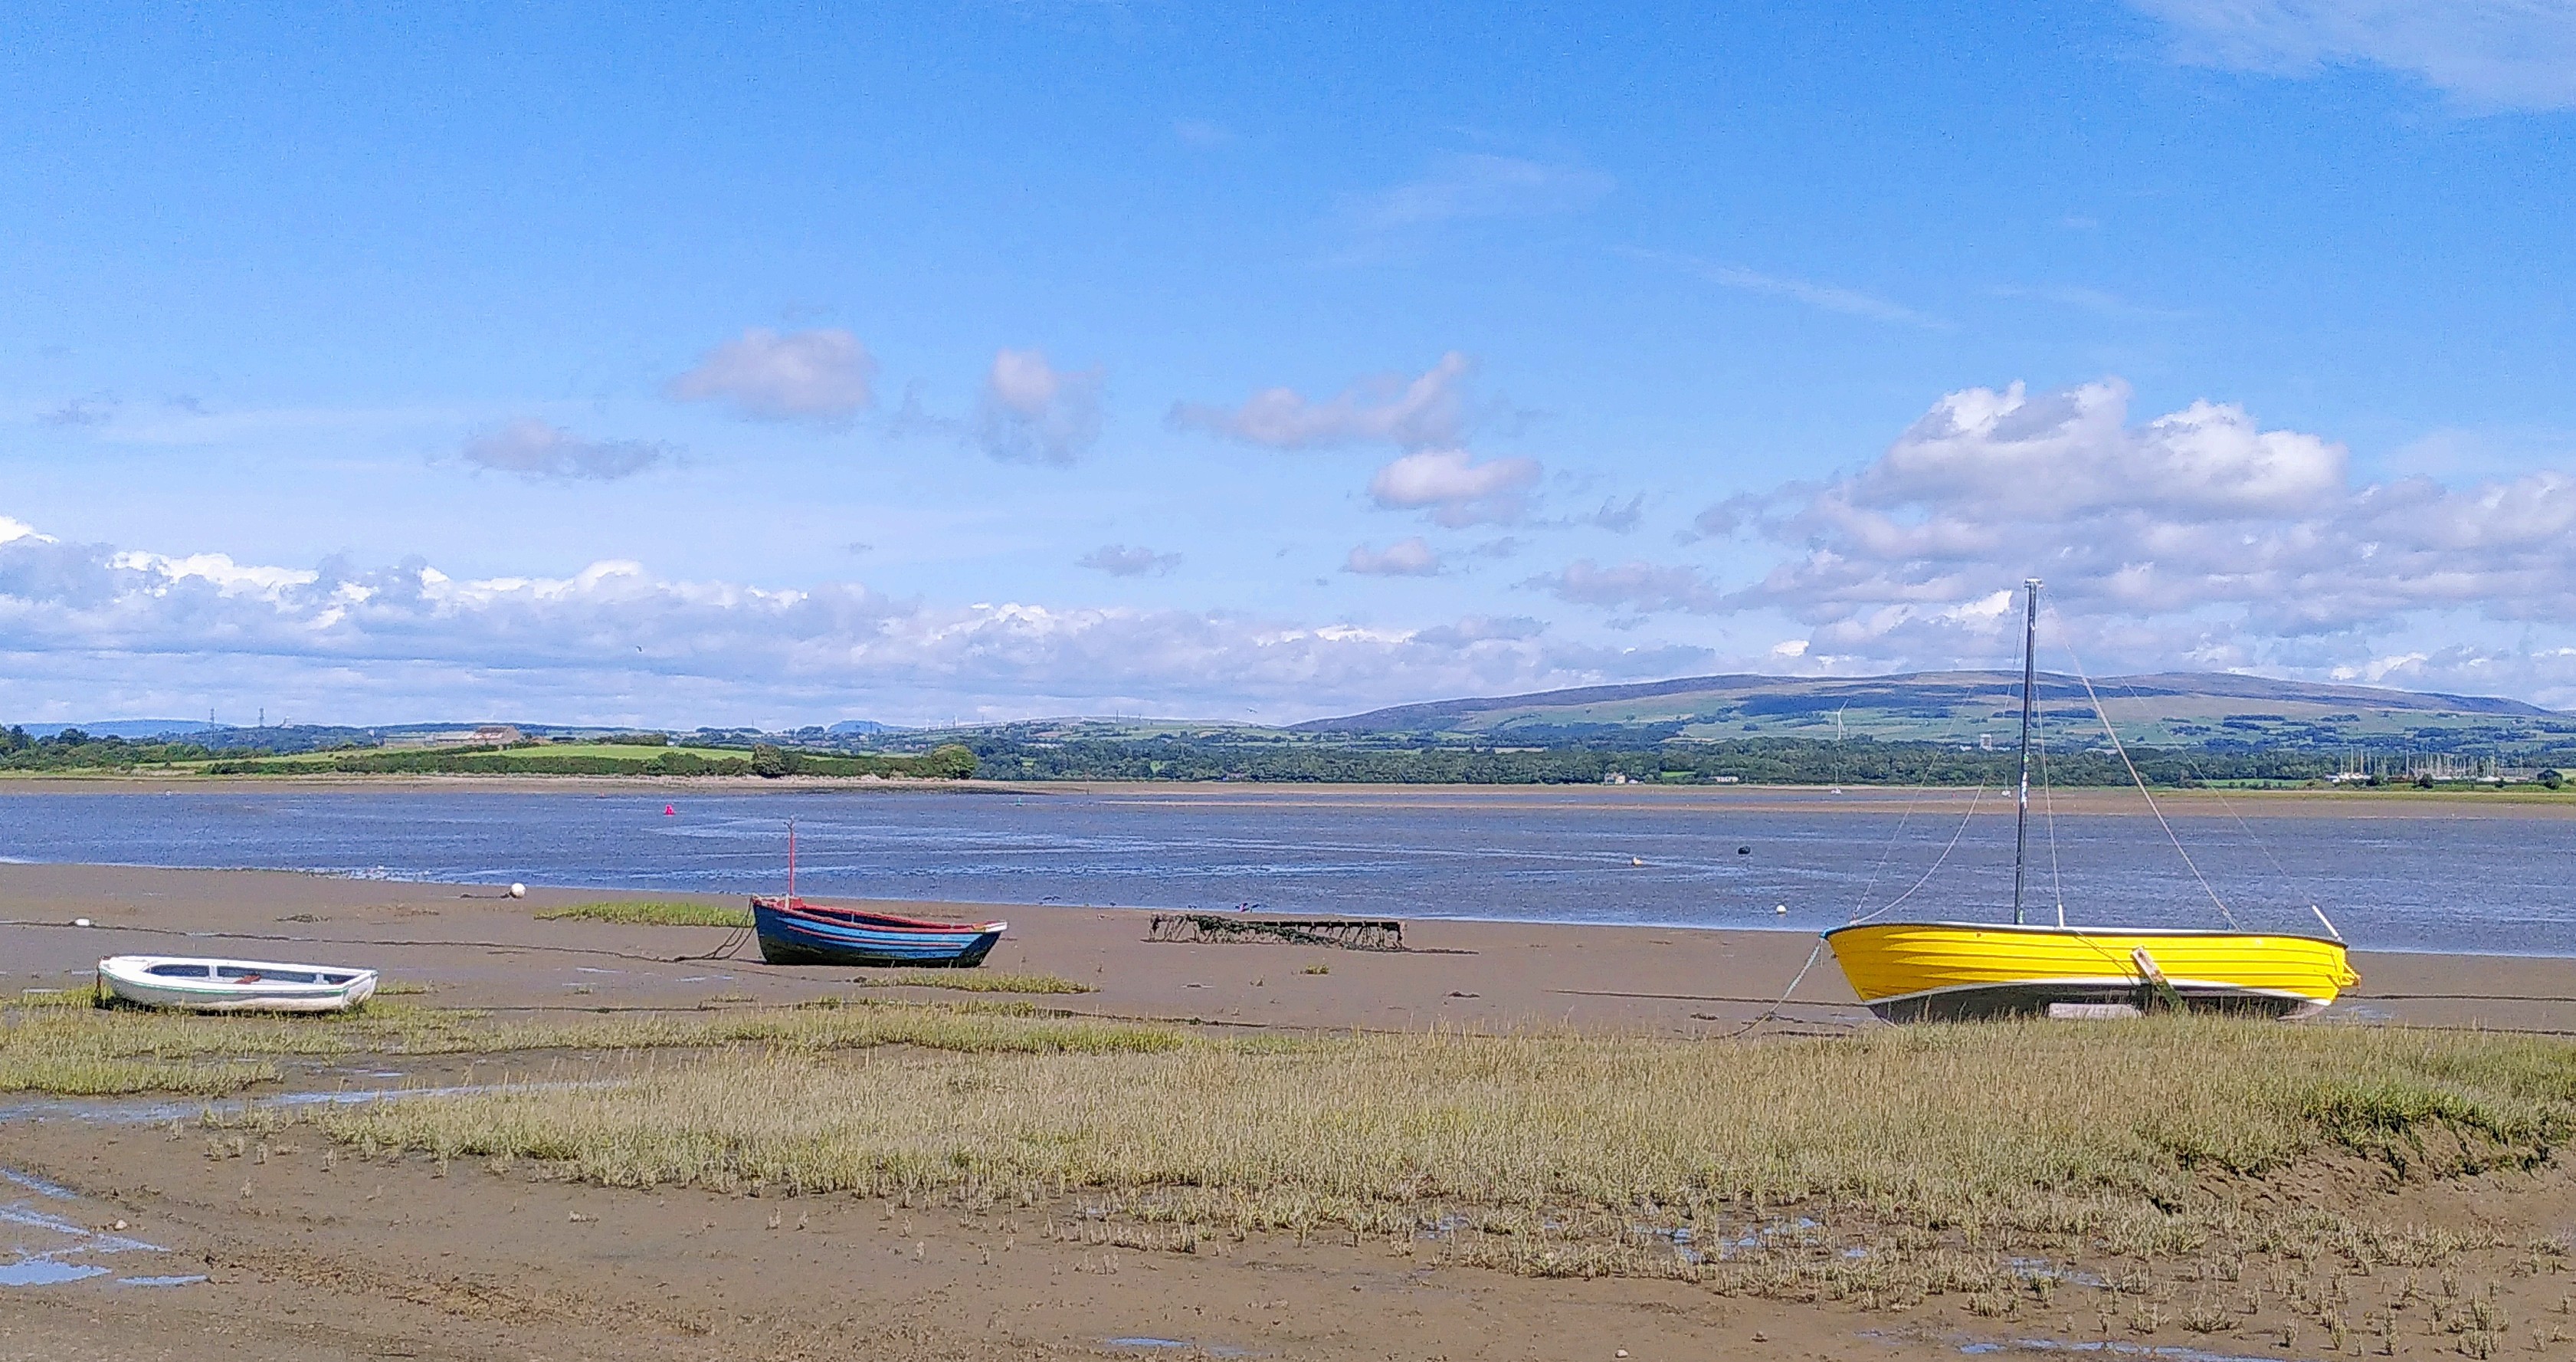 Tide's coming in, Sunderland Point, 8/8/23